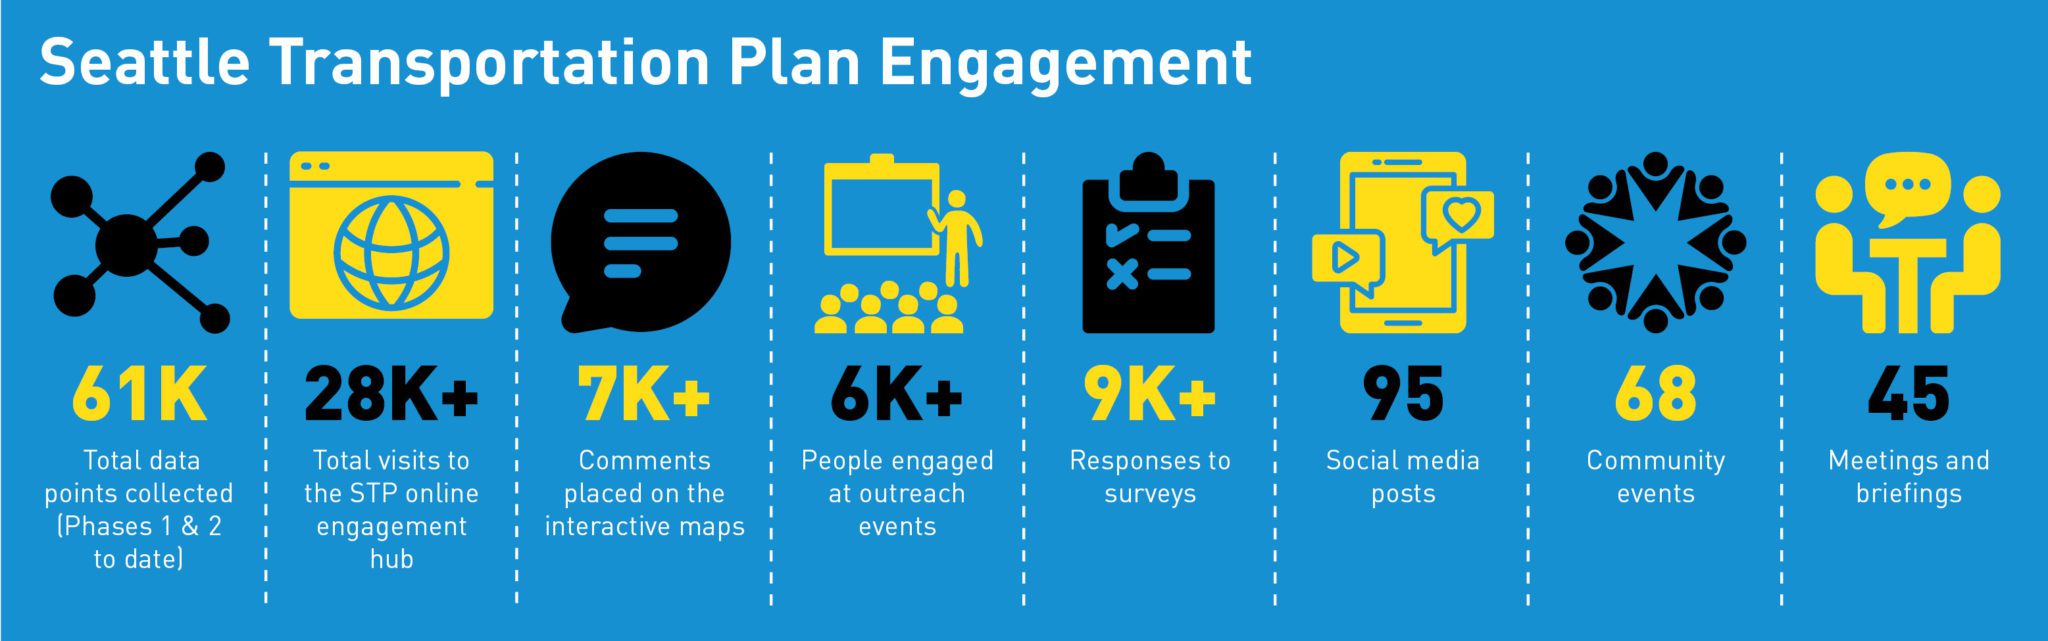 Graphic highlighting key stats for the Seattle Transportation Plan (STP) public engagement, including: 61,000 total data points collected (phases 1 and 2 to date), 28,000+ total visits to the online engagement hub, 7,000+ comments placed on interactive maps, 6,000+ people engaged at outreach events, 9,000+ responses to surveys, 95 social media posts, 68 community events, and 45 meetings and briefings.